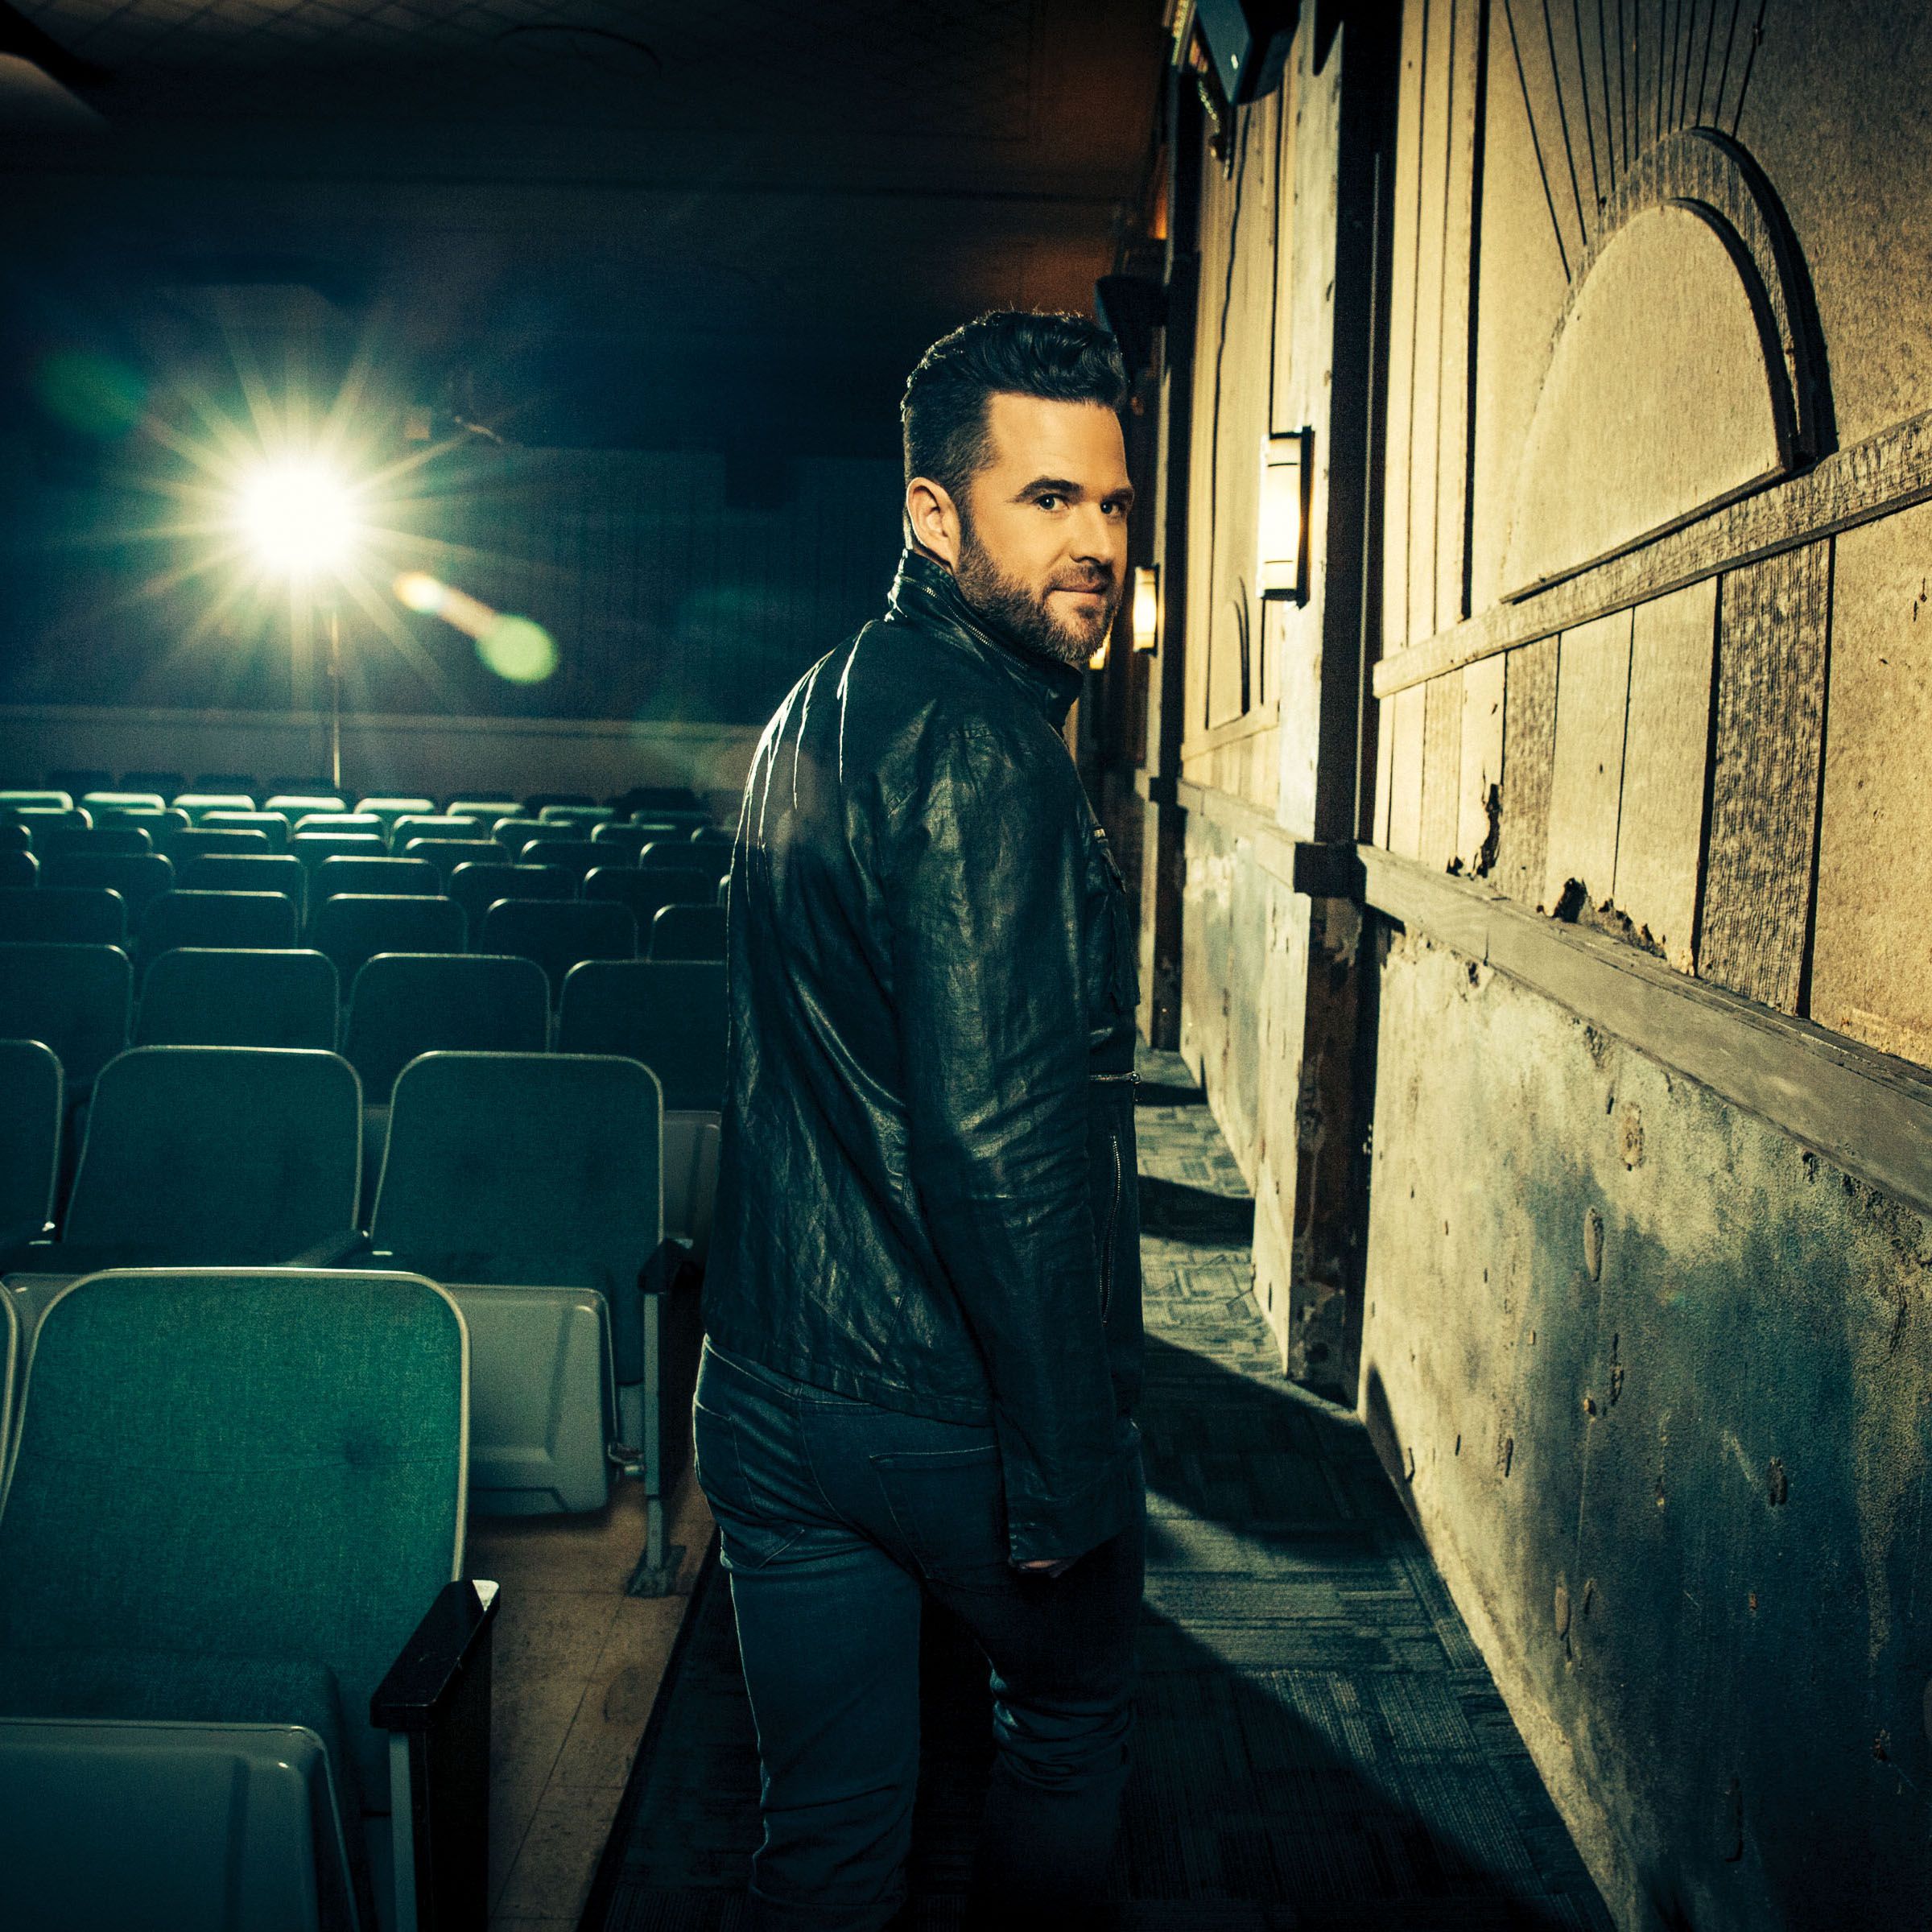 David Nail’s Releases New Single “Good At Tonight” (Featuring Brothers Osborne)  From His Critically-Acclaimed Album Fighter on September 12